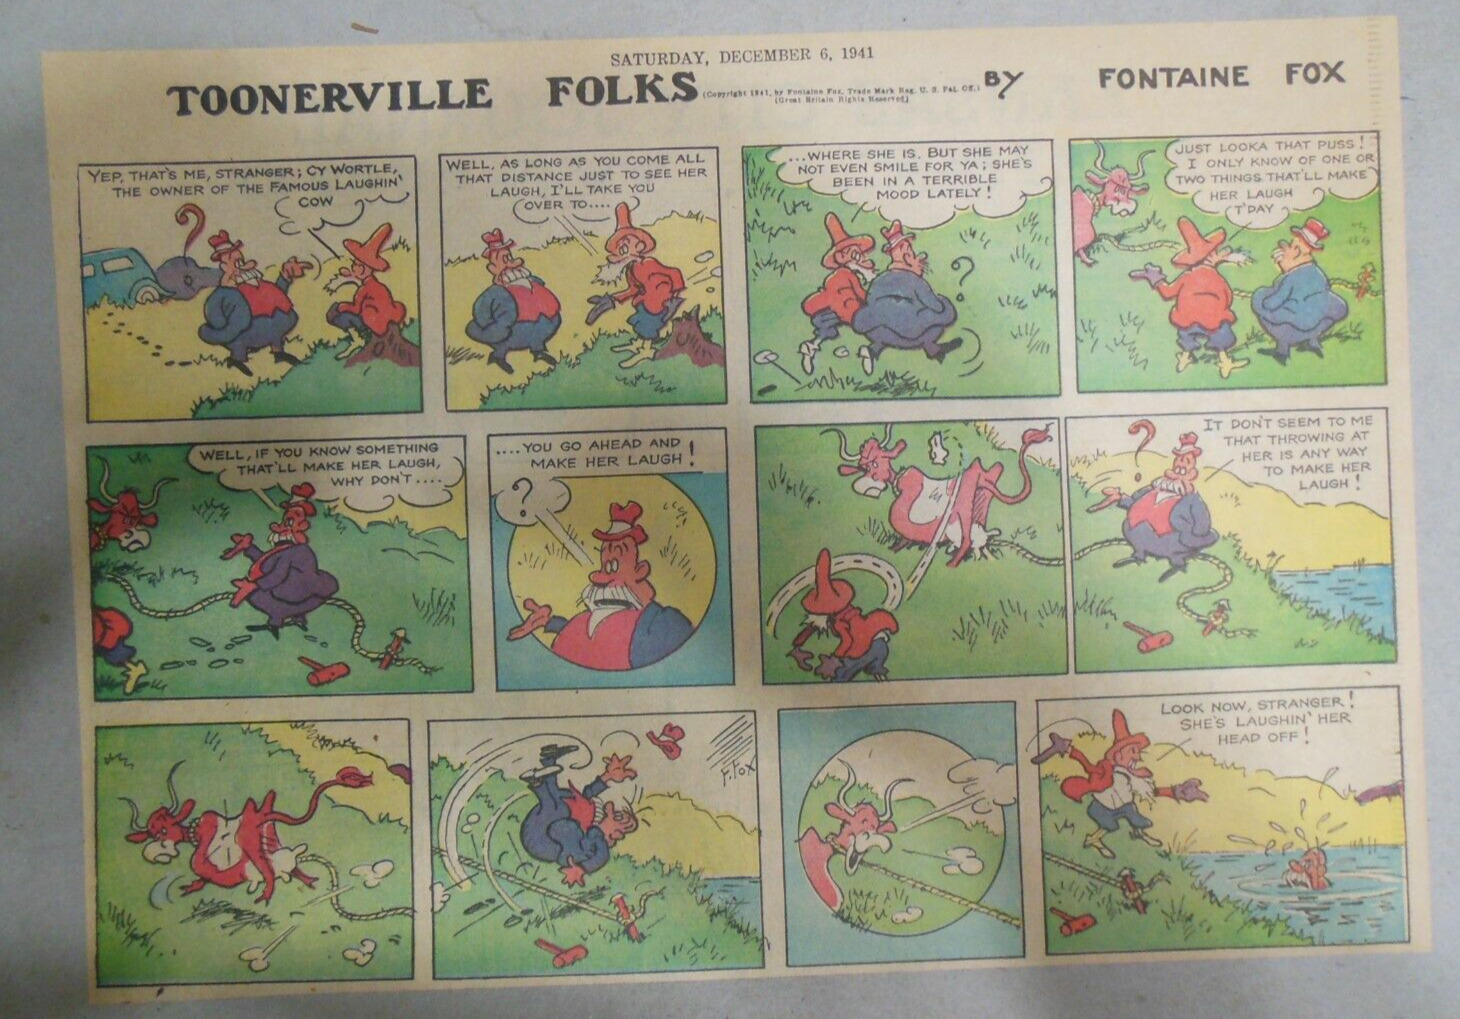 Toonerville Folks Sunday by Fontaine Fox from 12/6/1941 Size: 11 x 15 Color Page